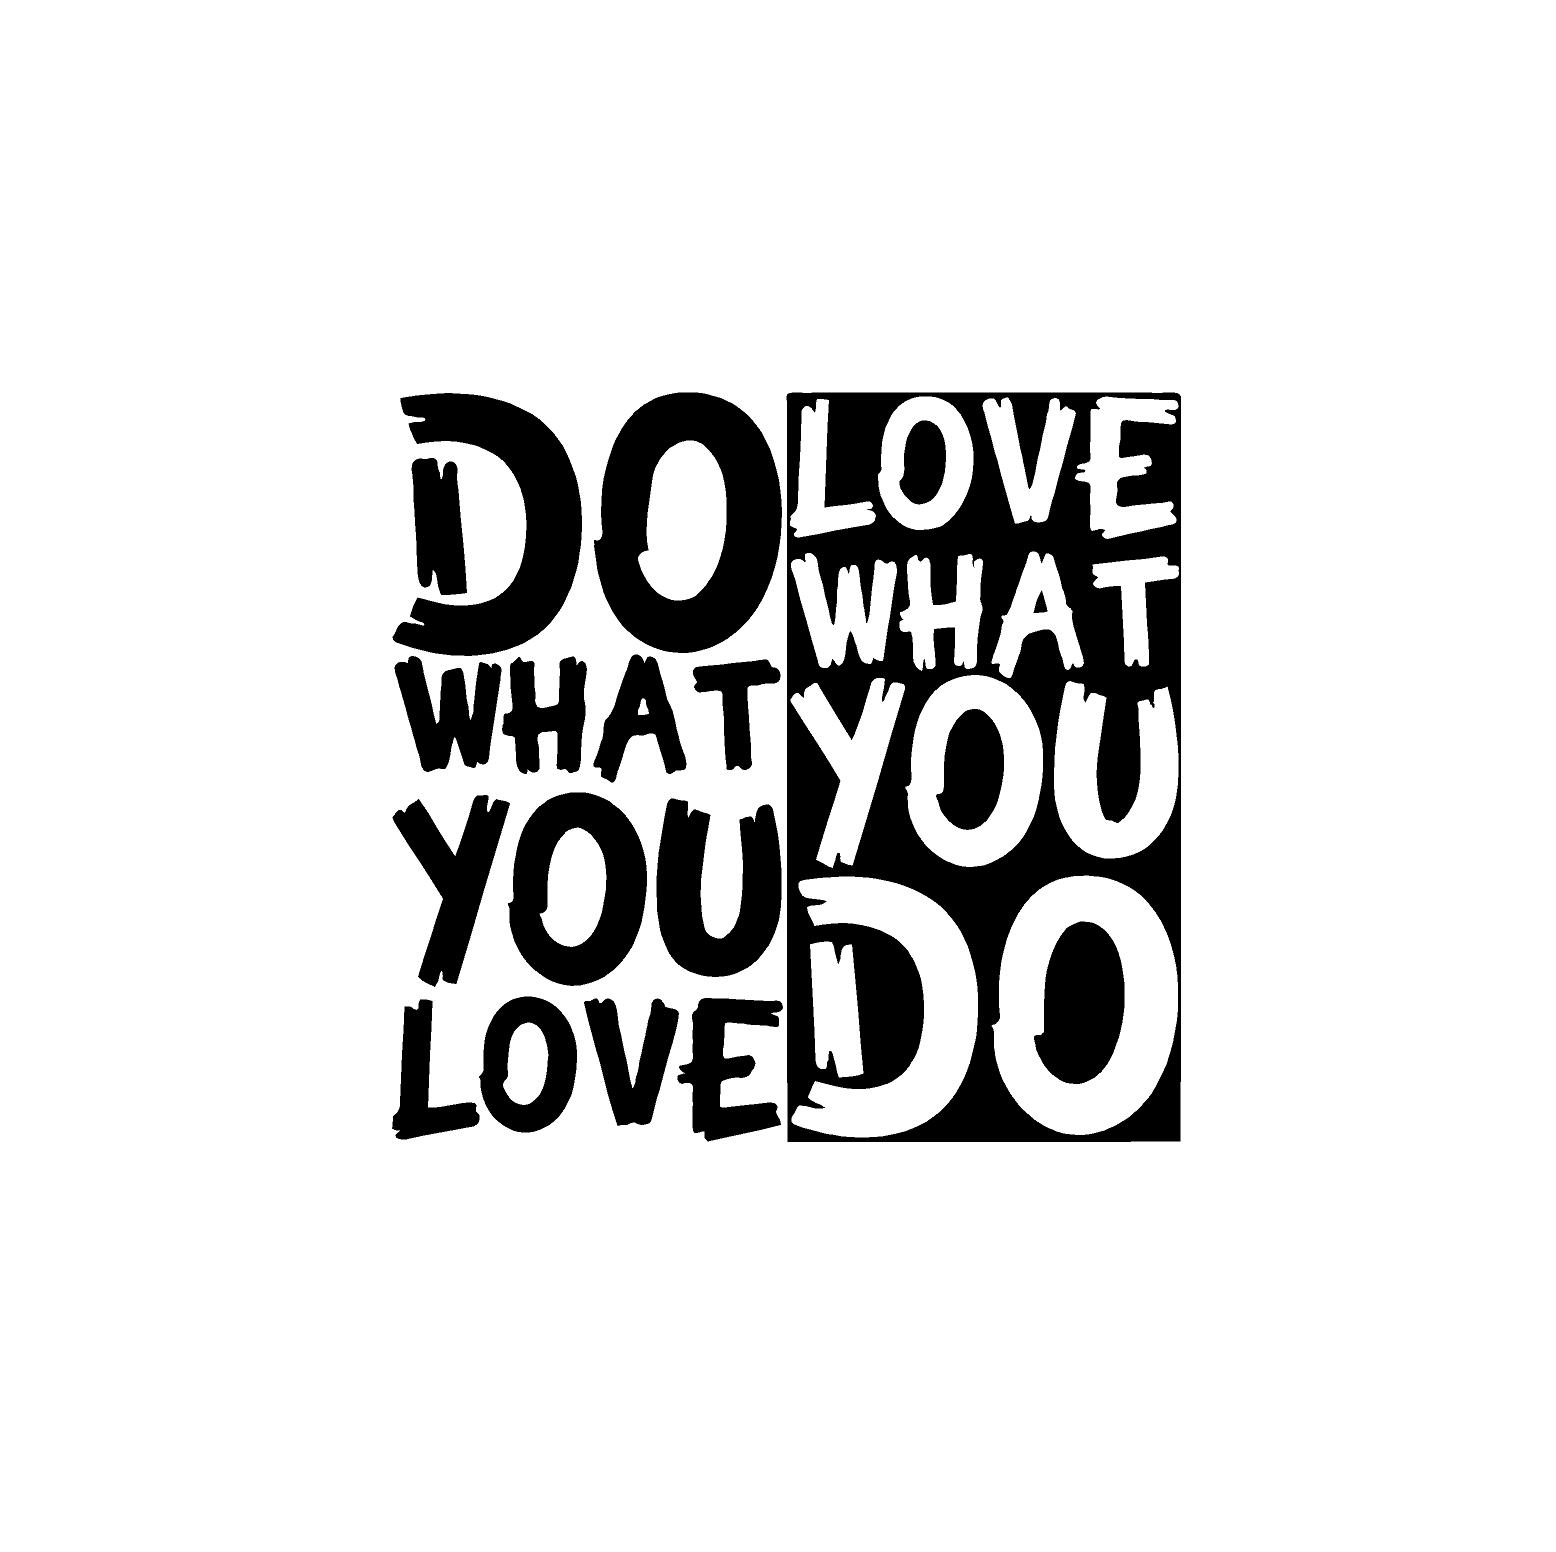 Love what you do.